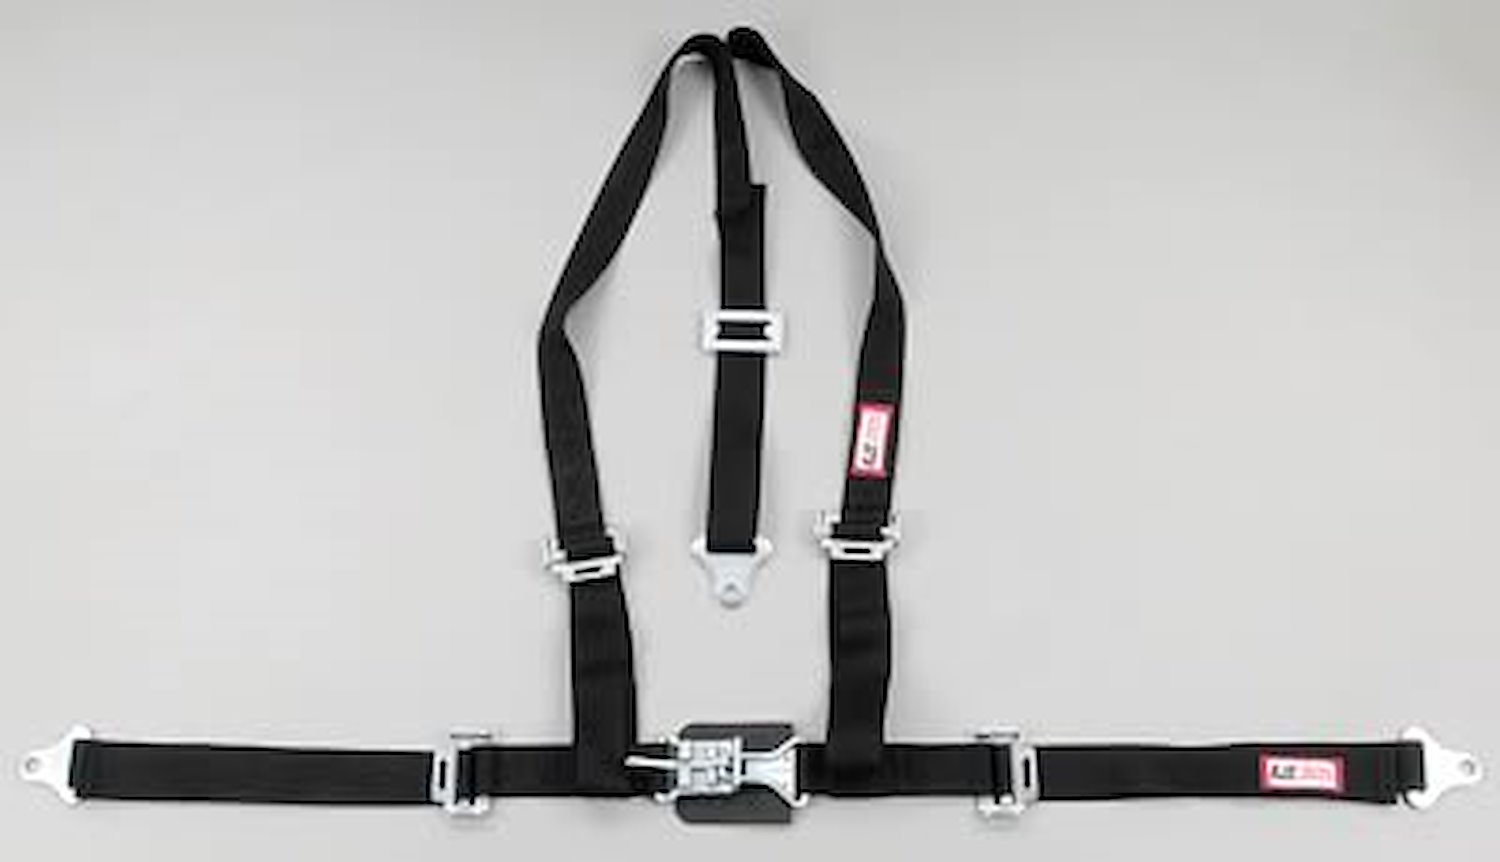 NON-SFI L&L HARNESS 2 PULL UP Lap Belt SNAP SEWN IN 2 S.H. Individual ROLL BAR Mount w/STERNUM STRAP WRAP/SNAP GRAY